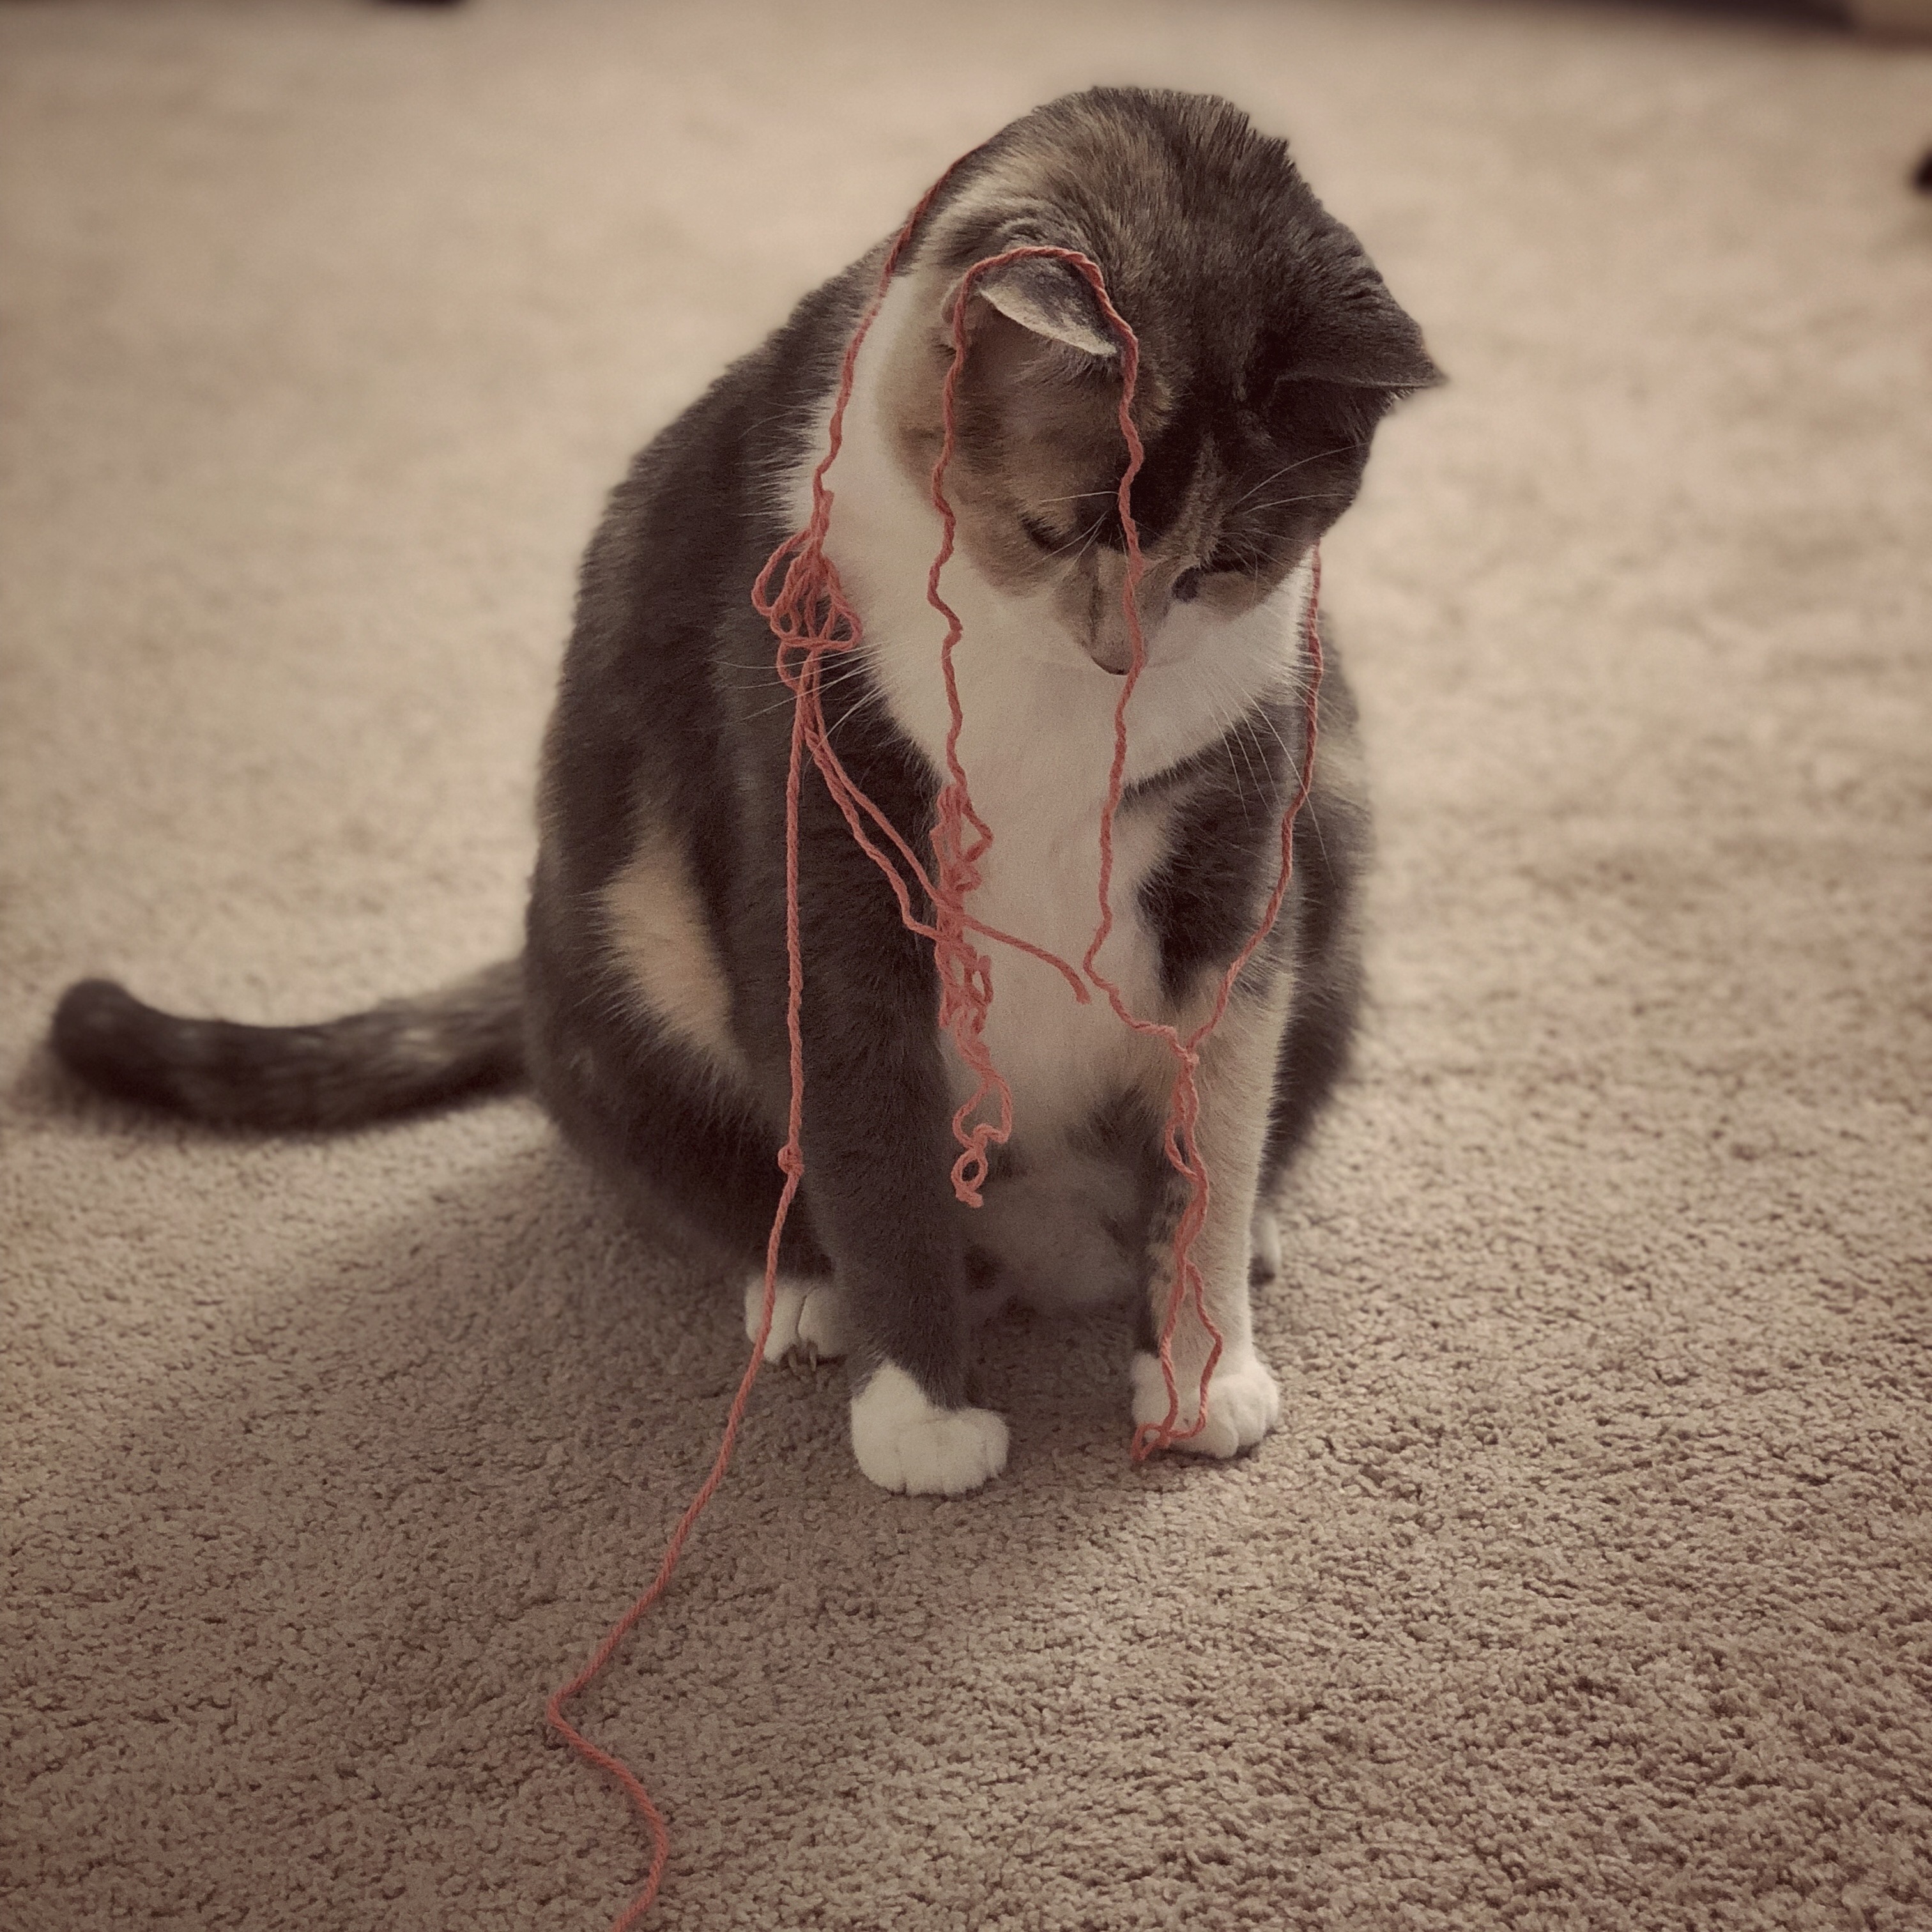 A photo of our cat Spice playing with wool